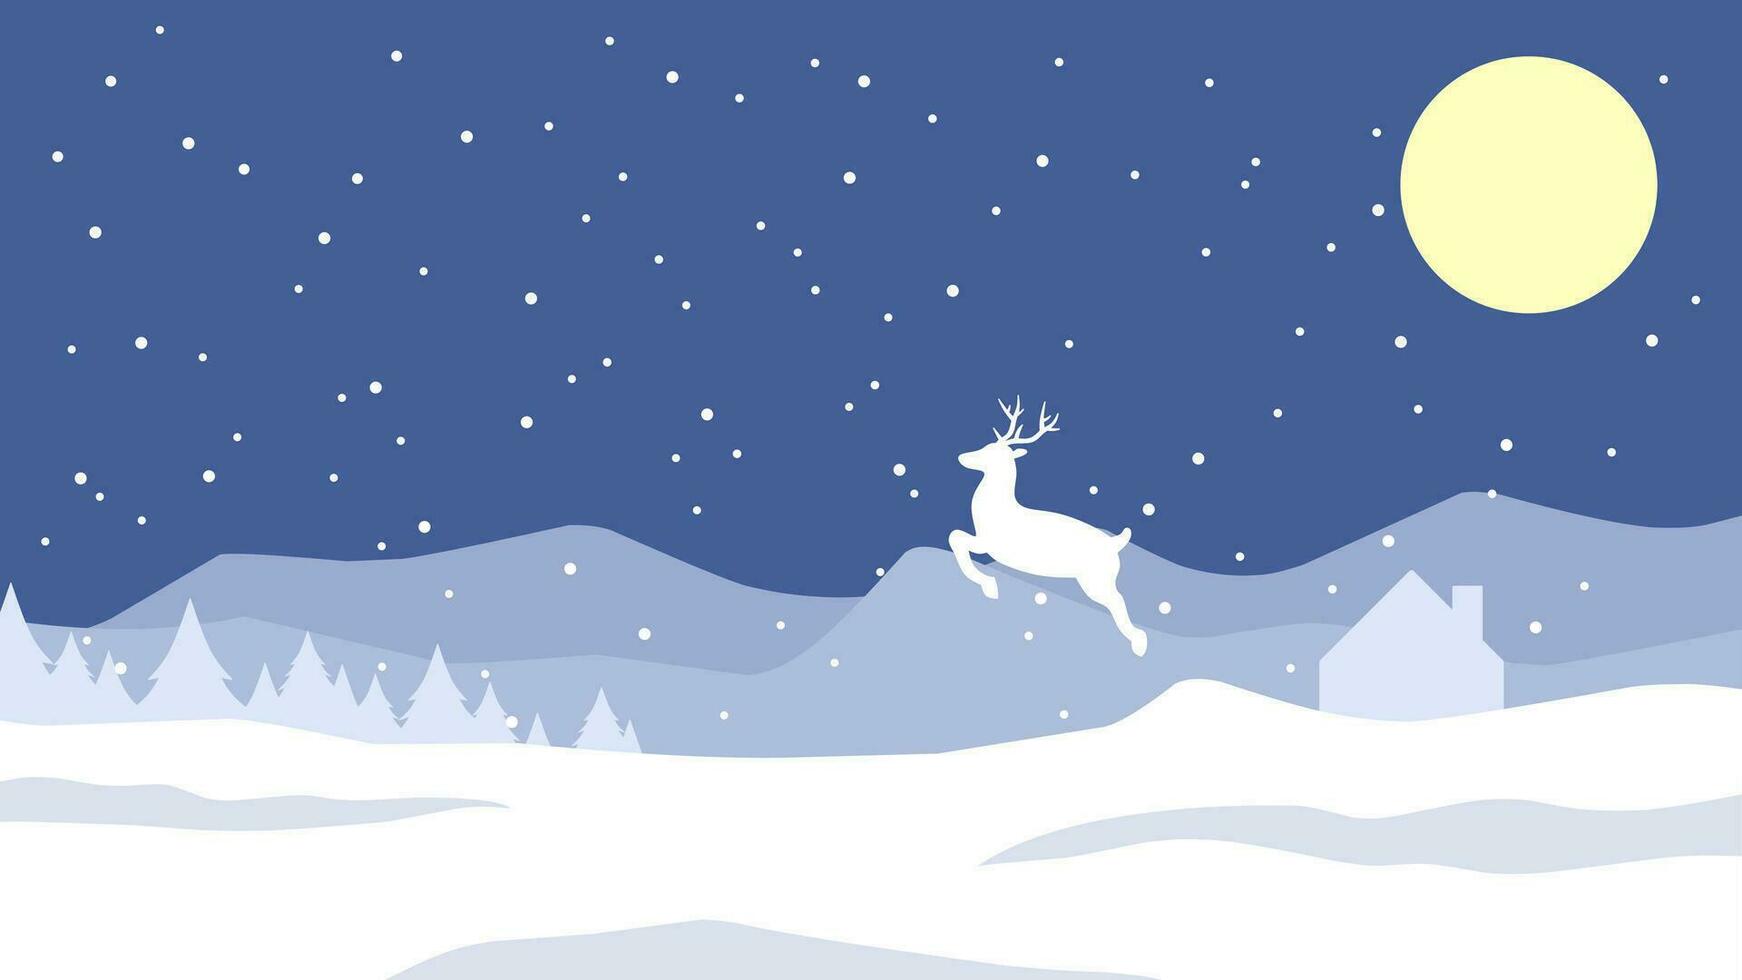 Winter in the night landscape vector illustration. Winter background with reindeer and pine forest at the snow hill. Silhouette of cold season landscape for background or wallpaper